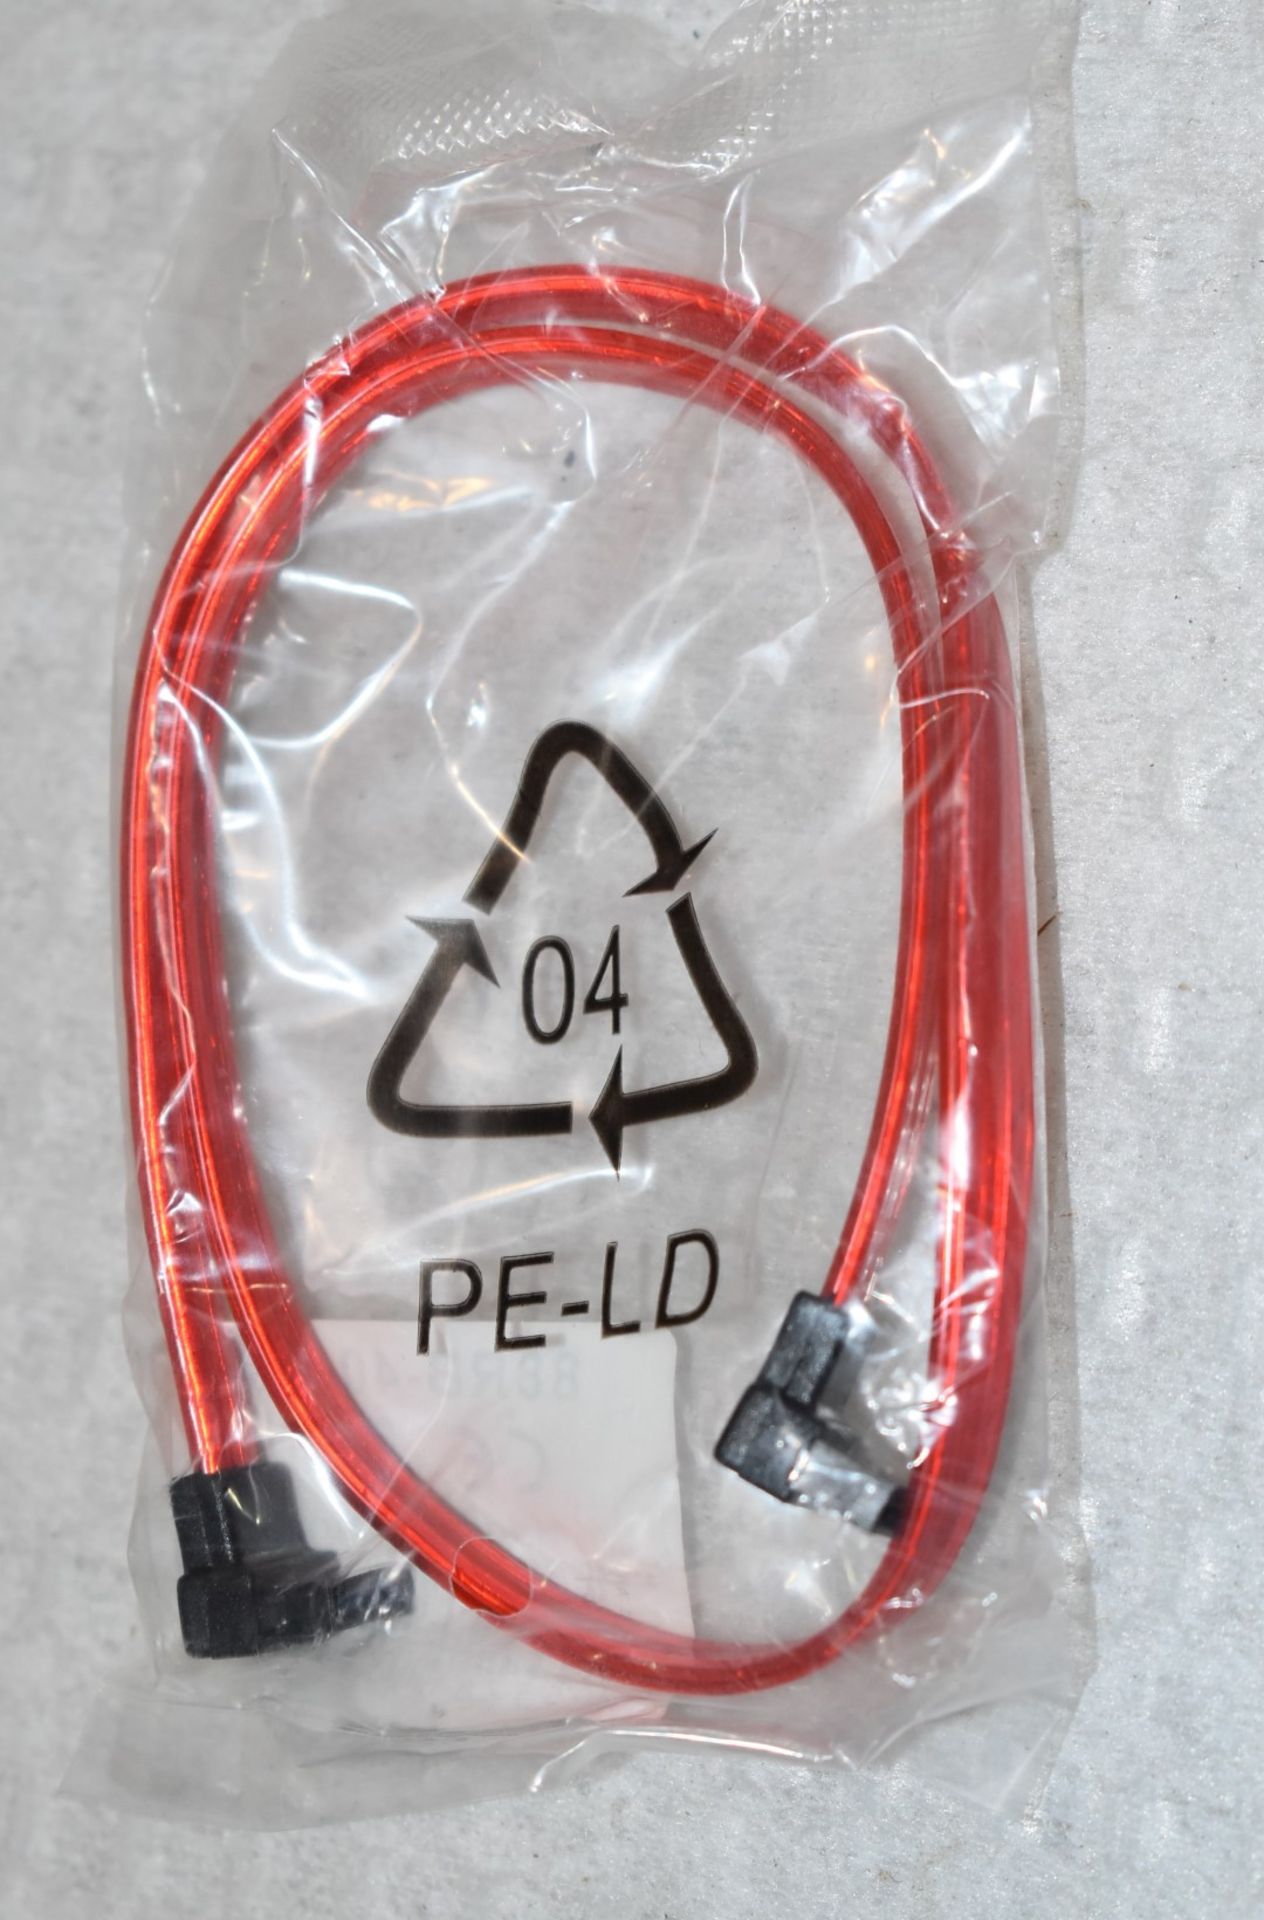 30 x Red SATA Hard Drive Cables - New in Packets - Image 3 of 4